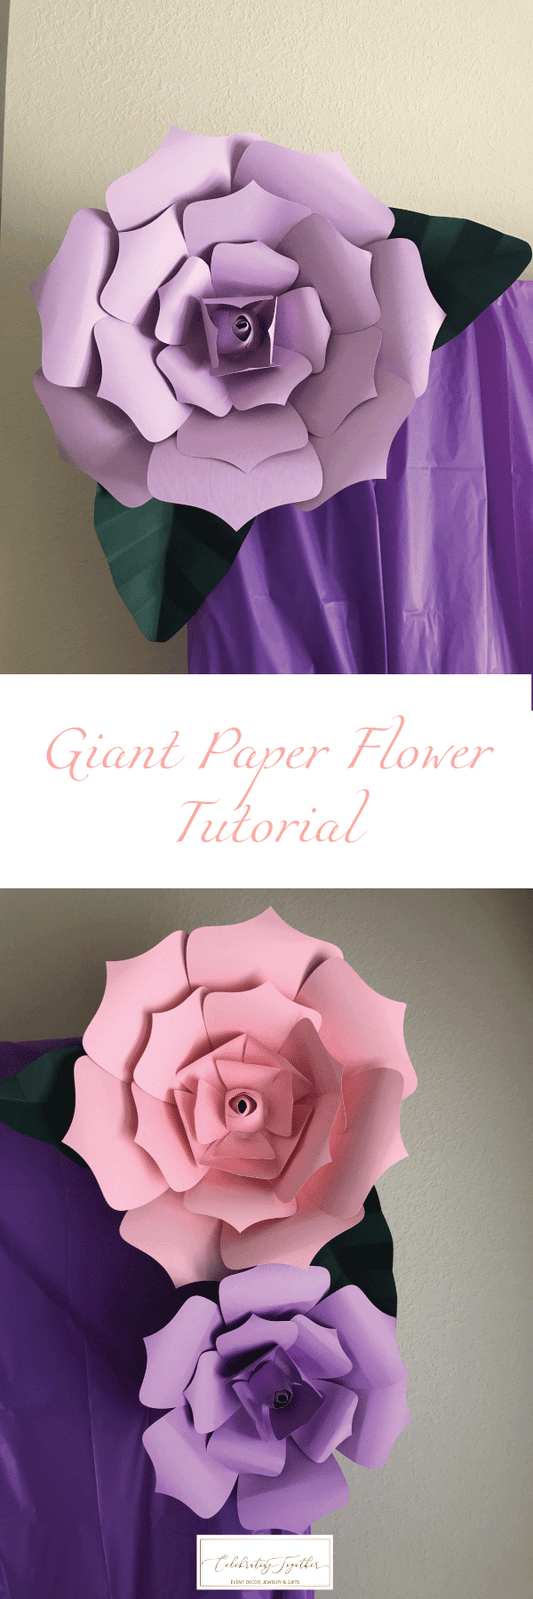 Assemble Flower Petals For Giant Paper Flowers For Your Wedding Or Baby Shower